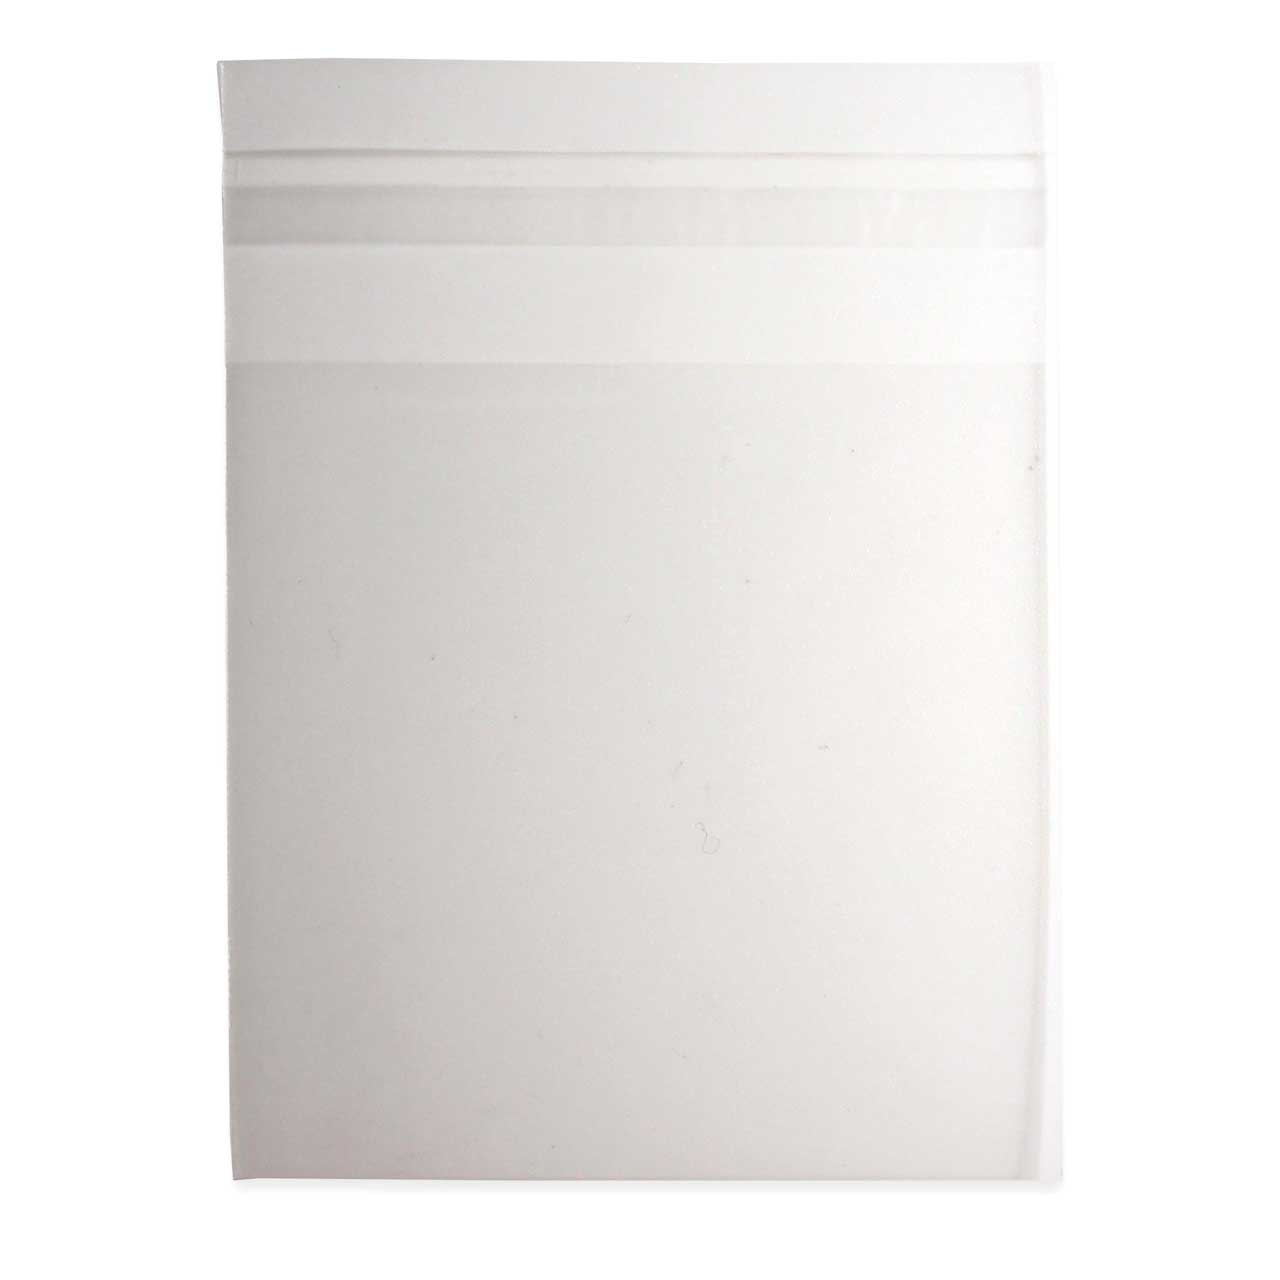 2 Mil Thick Ultra Clear Self Adhesive Resealable Clear Plastic Cellophane Poly Bag (100 Bags) -Multiple Sizes Available